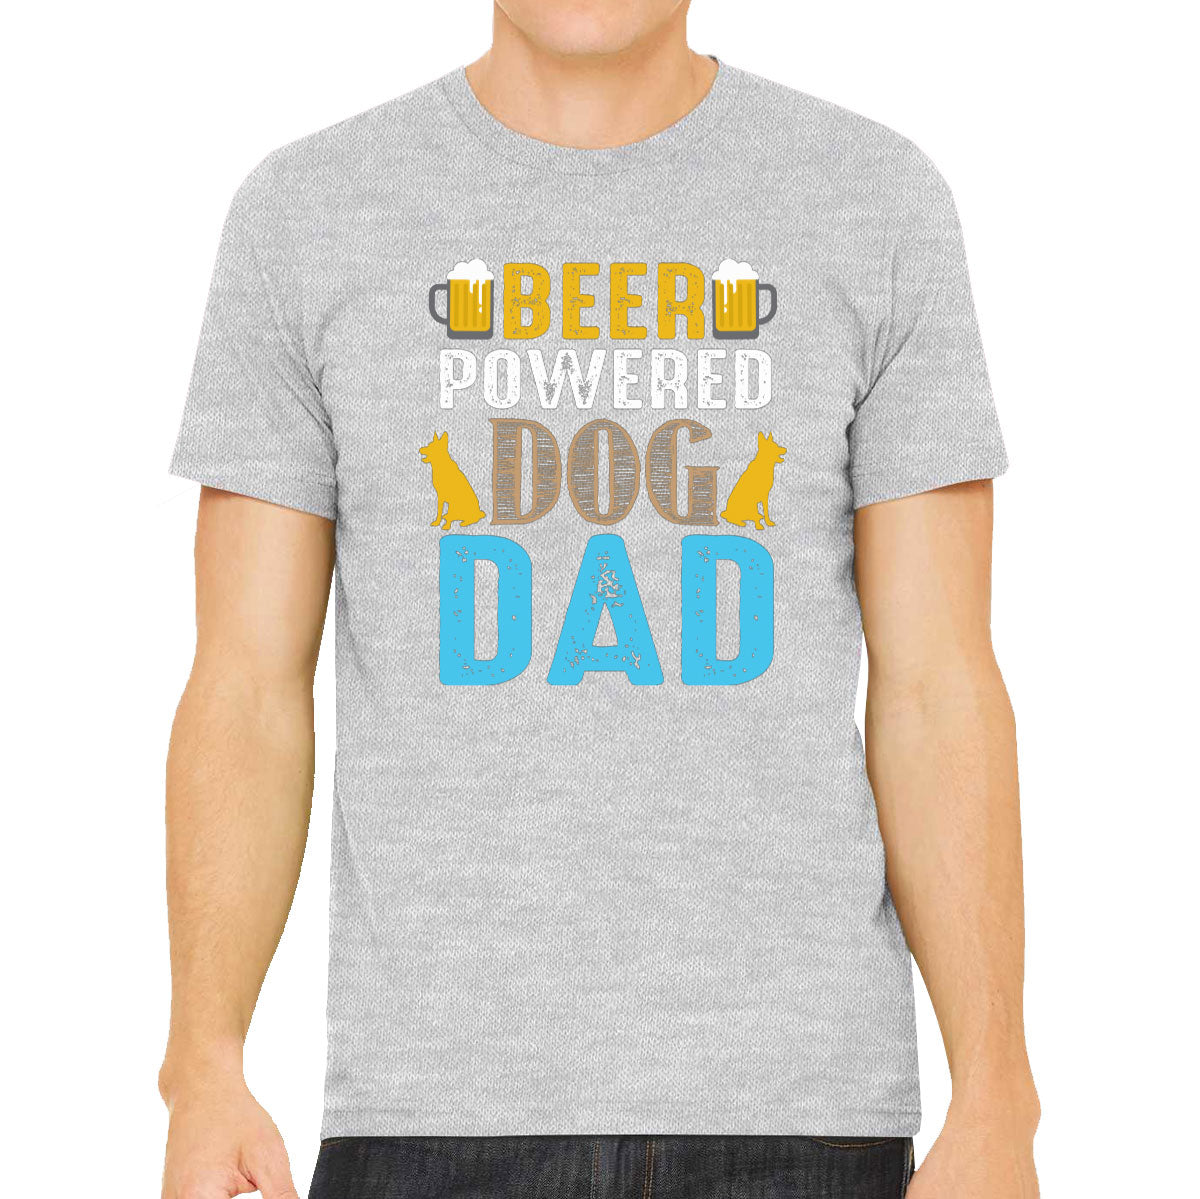 Beer Powered Dog Dad Father's Day Men's T-shirt